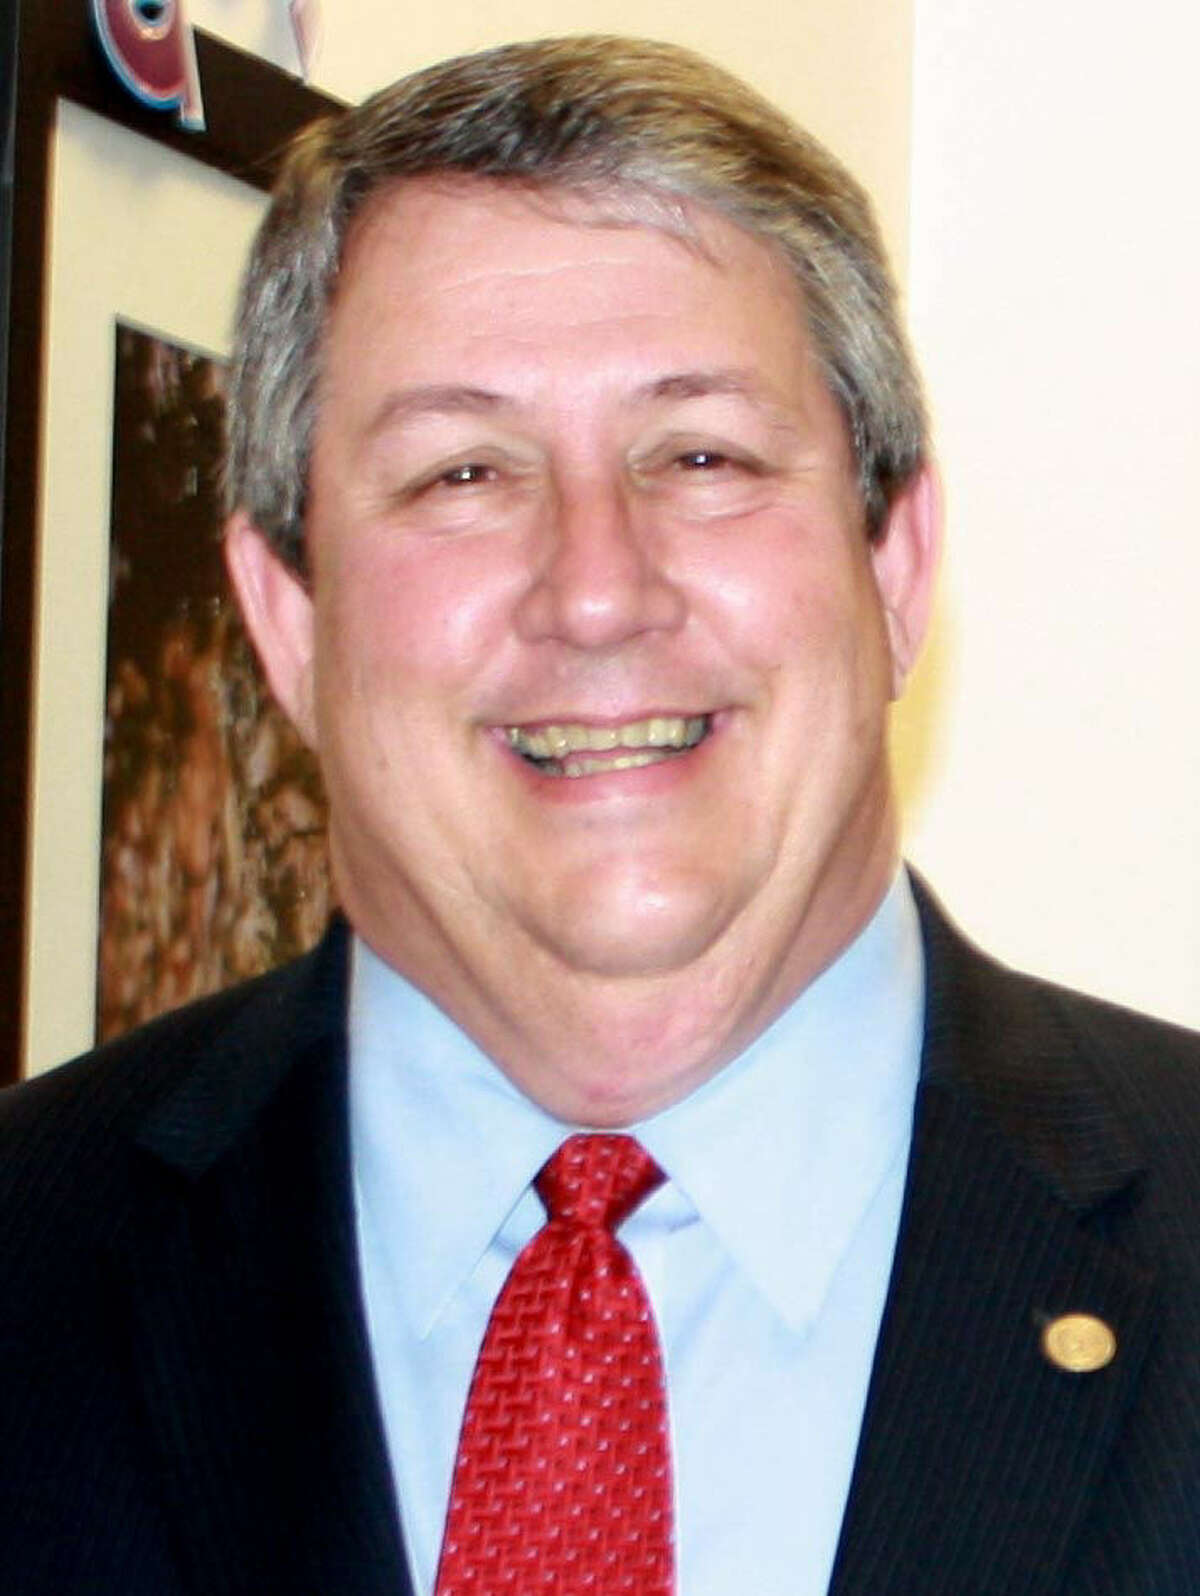 Doug Miller, R-New Braunfels, represents Texas House District 73, which is comprised of Comal, Gillespie and Kendall counties.